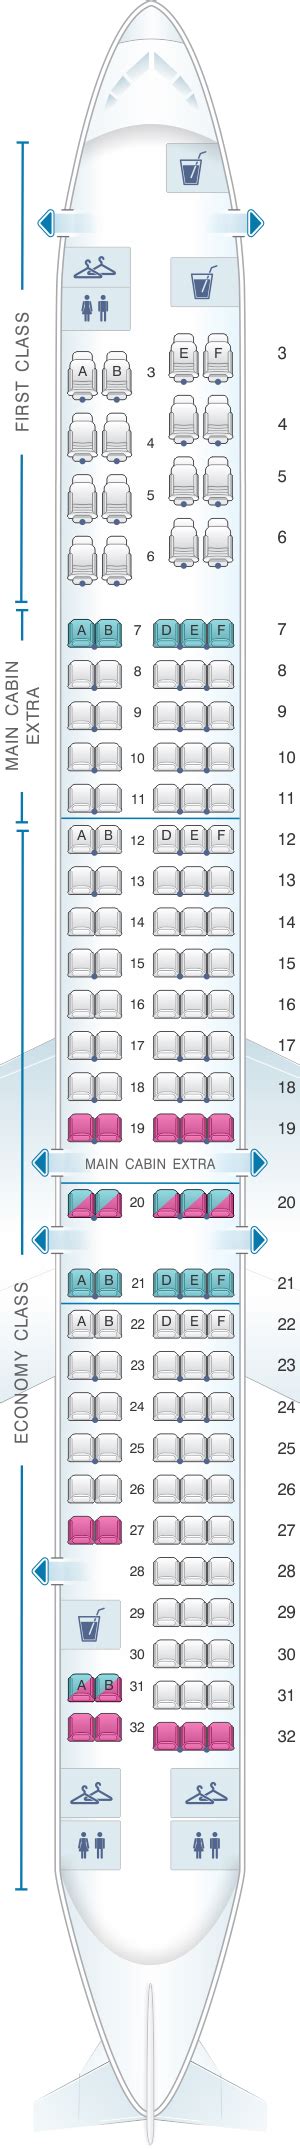 American Airlines Mcdonnell Douglas Md Seating Chart Updated Hot Sex